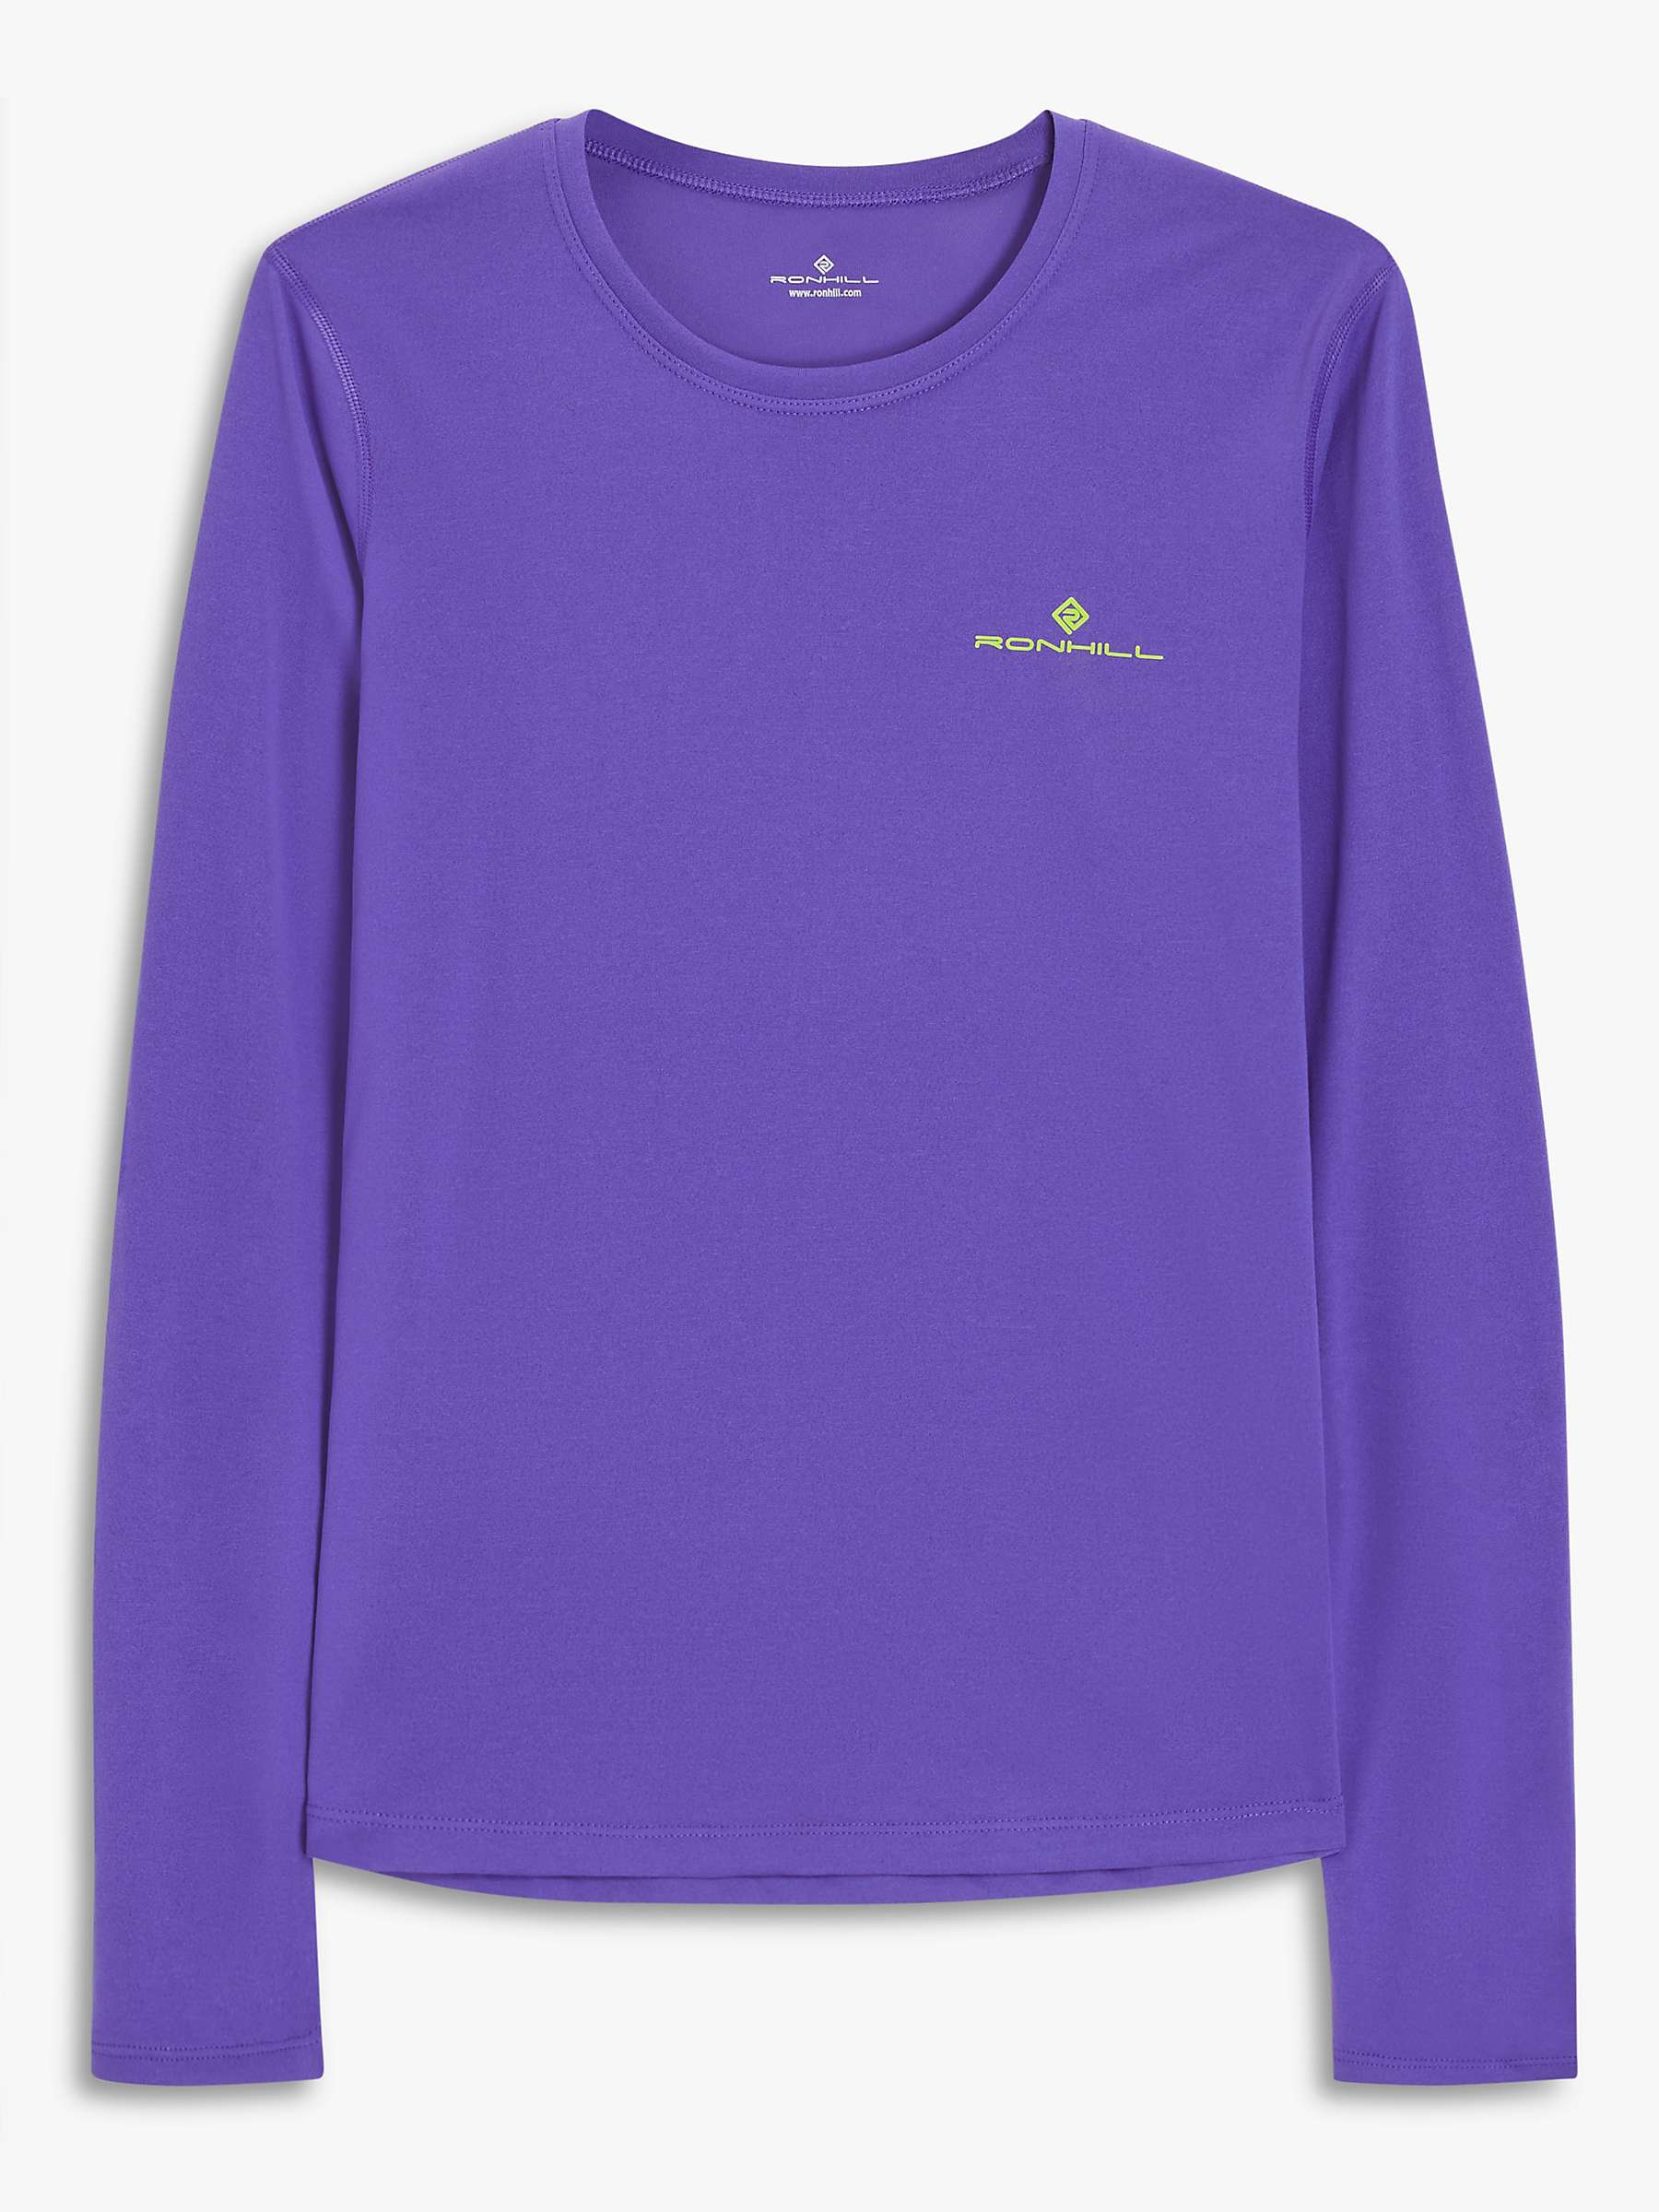 Buy Ronhill Core Long Sleeve Running Top Online at johnlewis.com